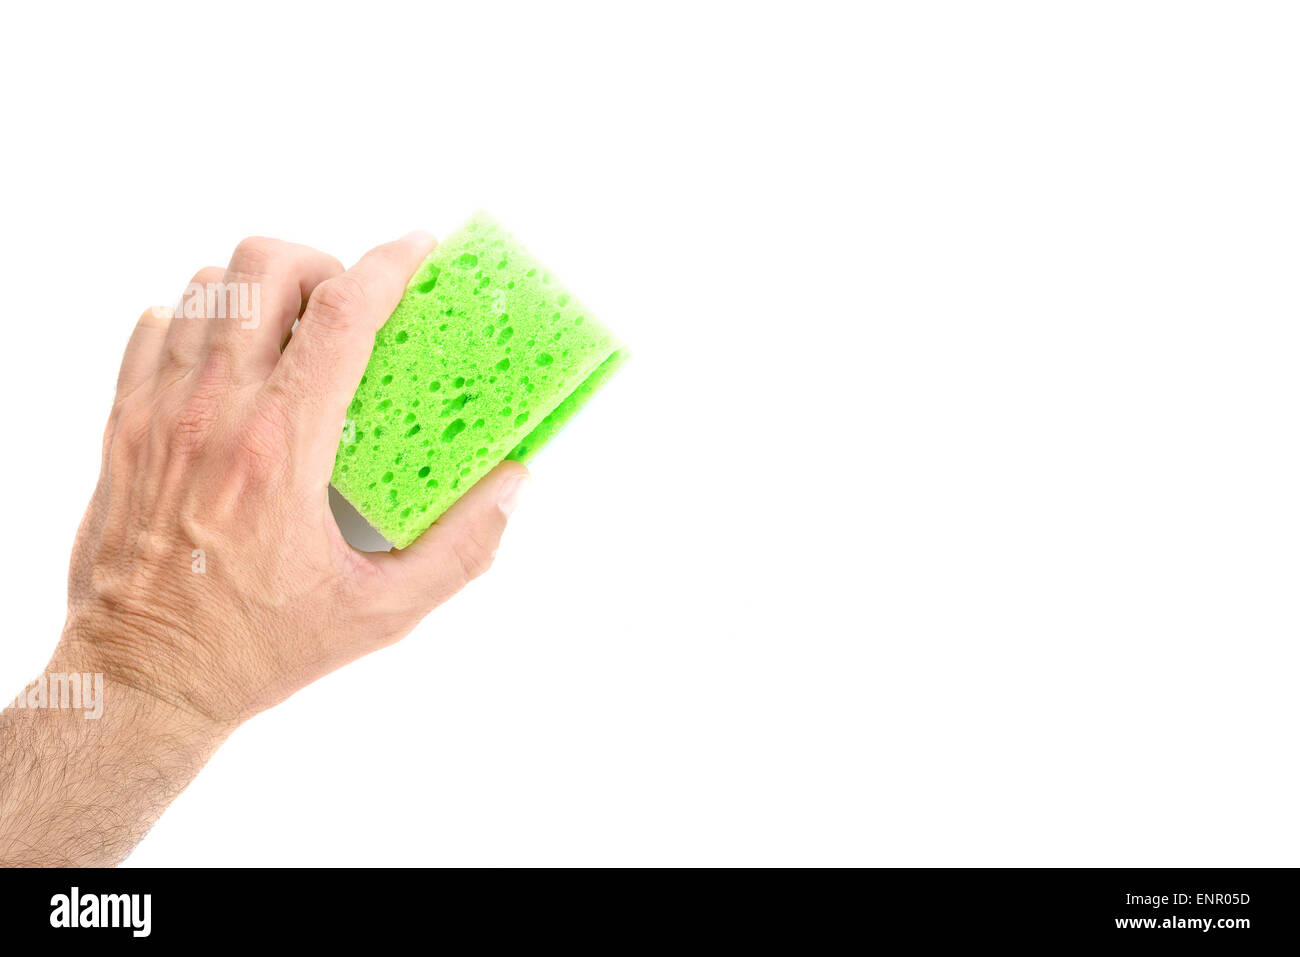 Caucasian Male Hand Holding Green Cleaning Sponge on White Background, Housekeeping Hygiene Concept with Blank Copy Space for Te Stock Photo